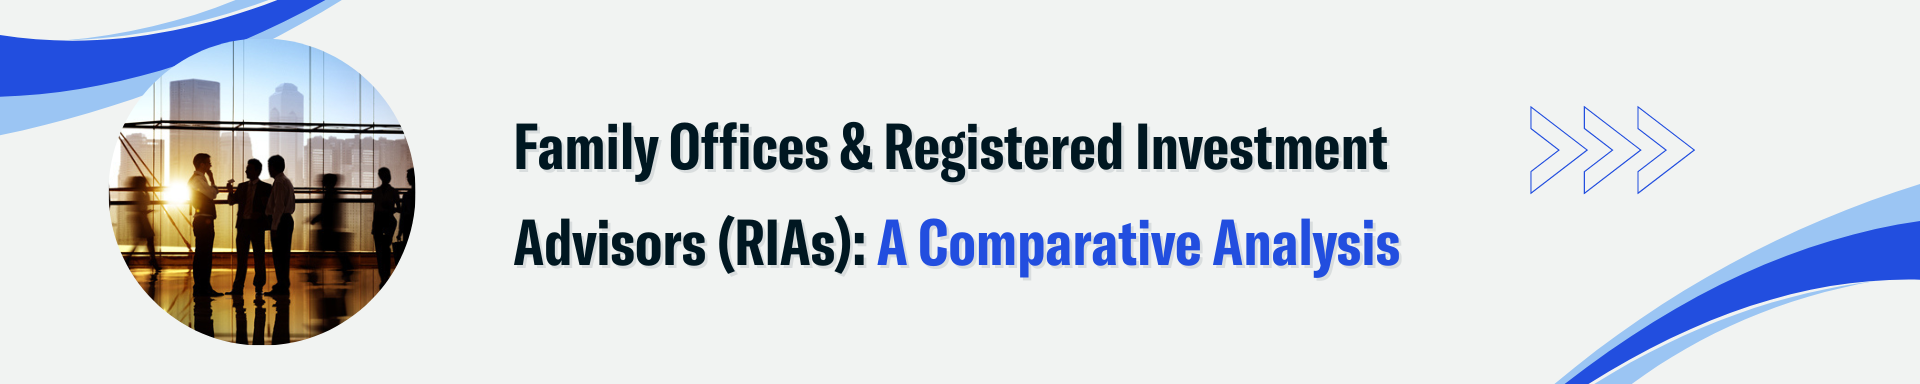 Family Offices & Registered Investment Advisors (RIAs) A Comparative Analysis